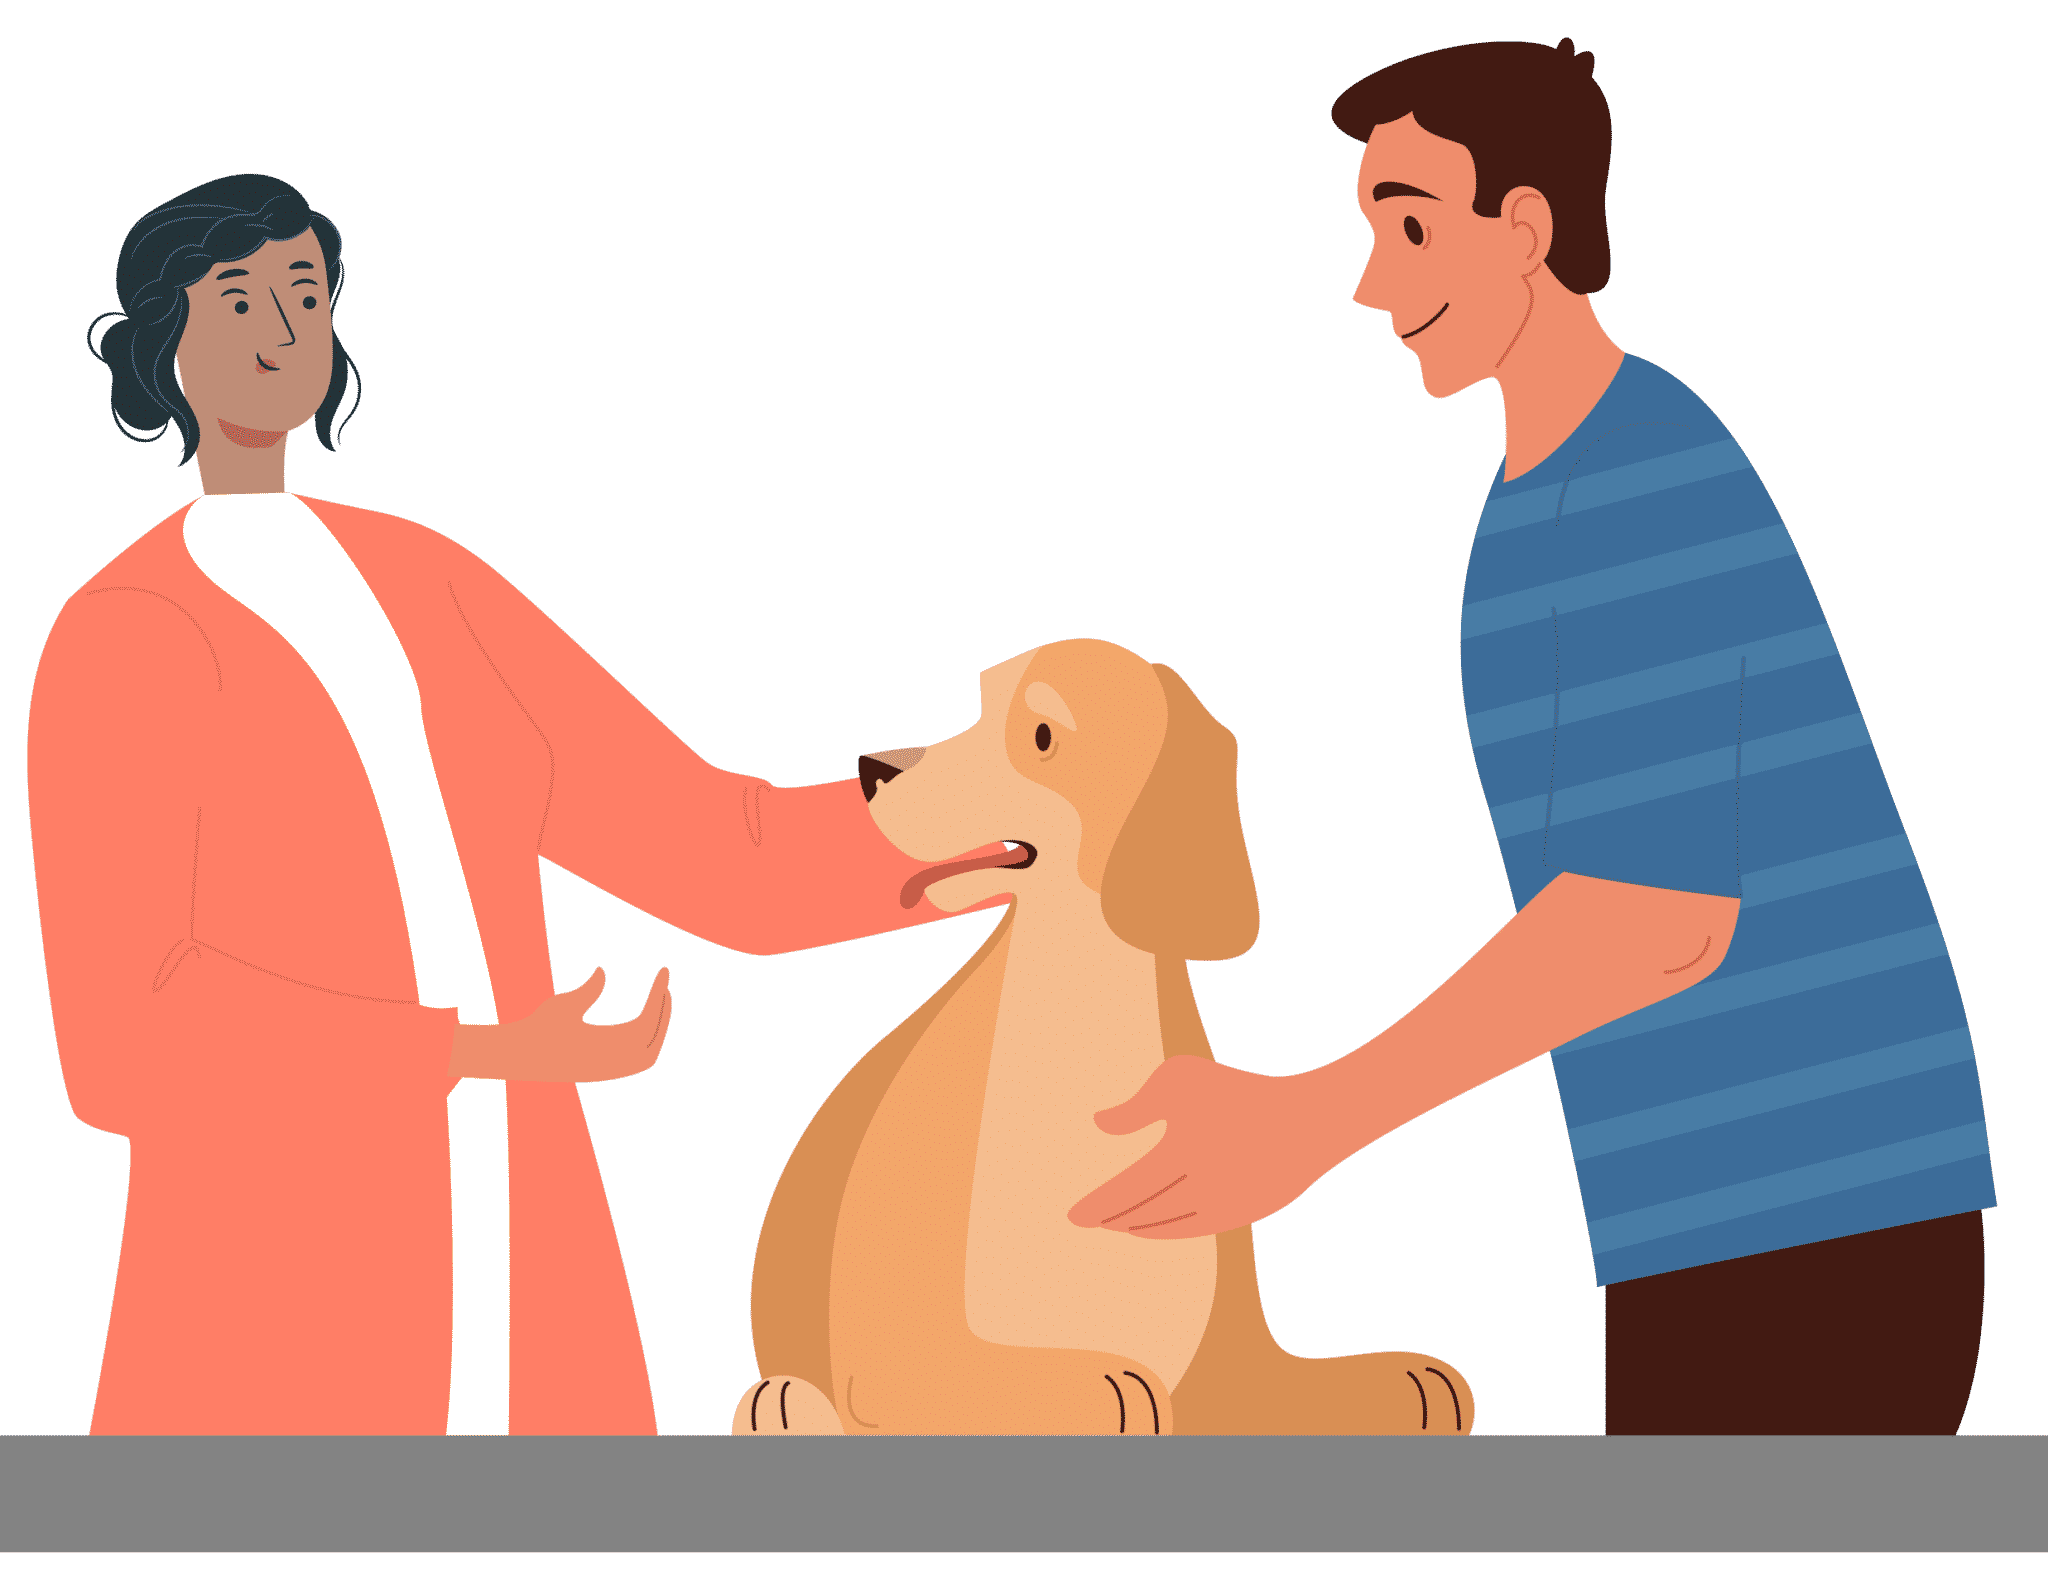 How To Become An Animal-Assisted Therapist The Definitive Guide animal-assisted therapist